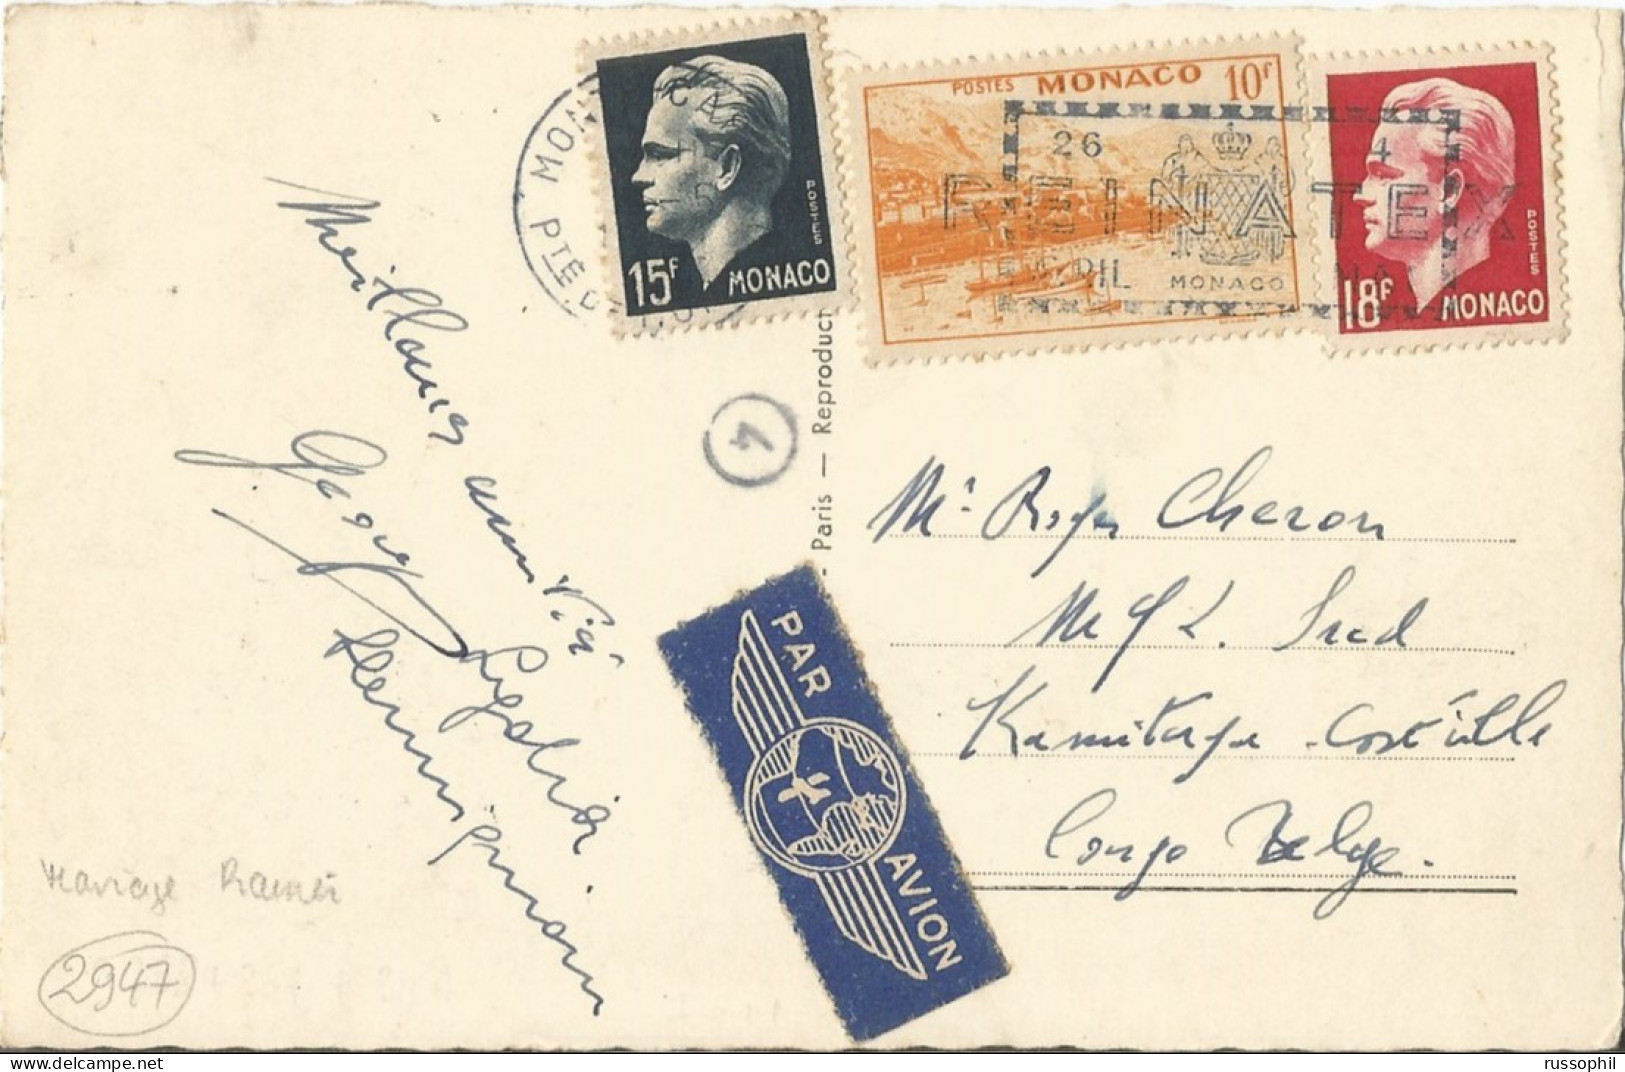 MONACO - 3 STAMP 43 FR. FRANKING (Yv. #367, #311A AND #368) ON PC (VIEW OF MONACO) TO BELGIAN CONGO - 1952 - Lettres & Documents